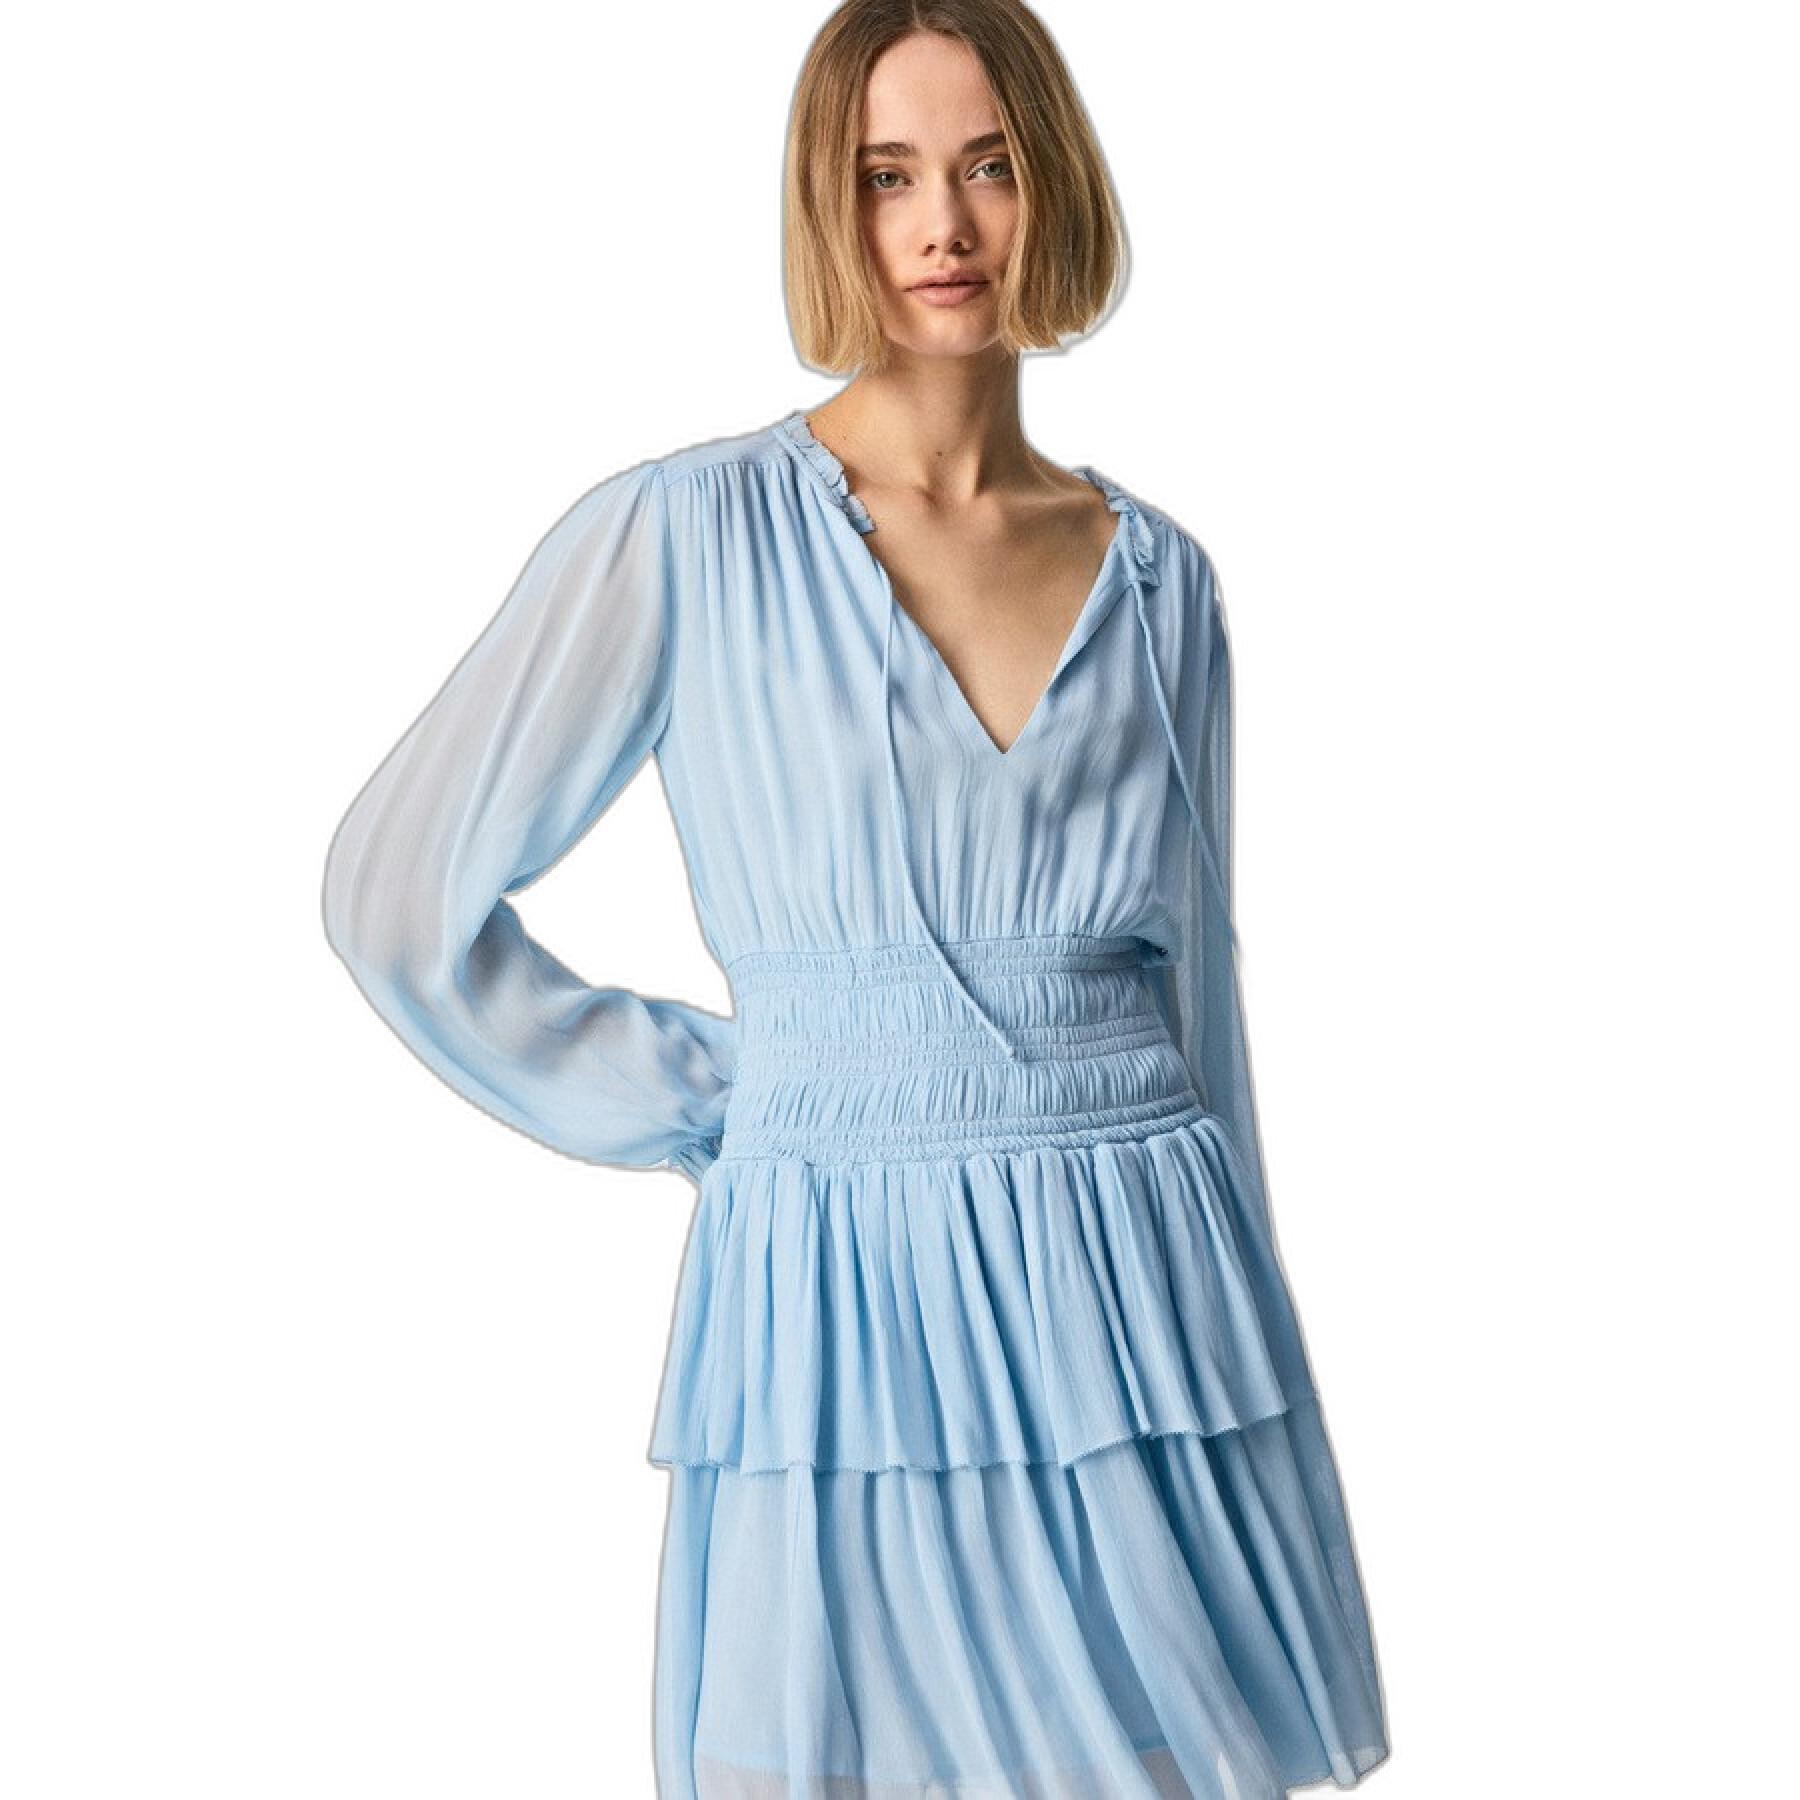 Robe manches longues femme Pepe Jeans Lucy